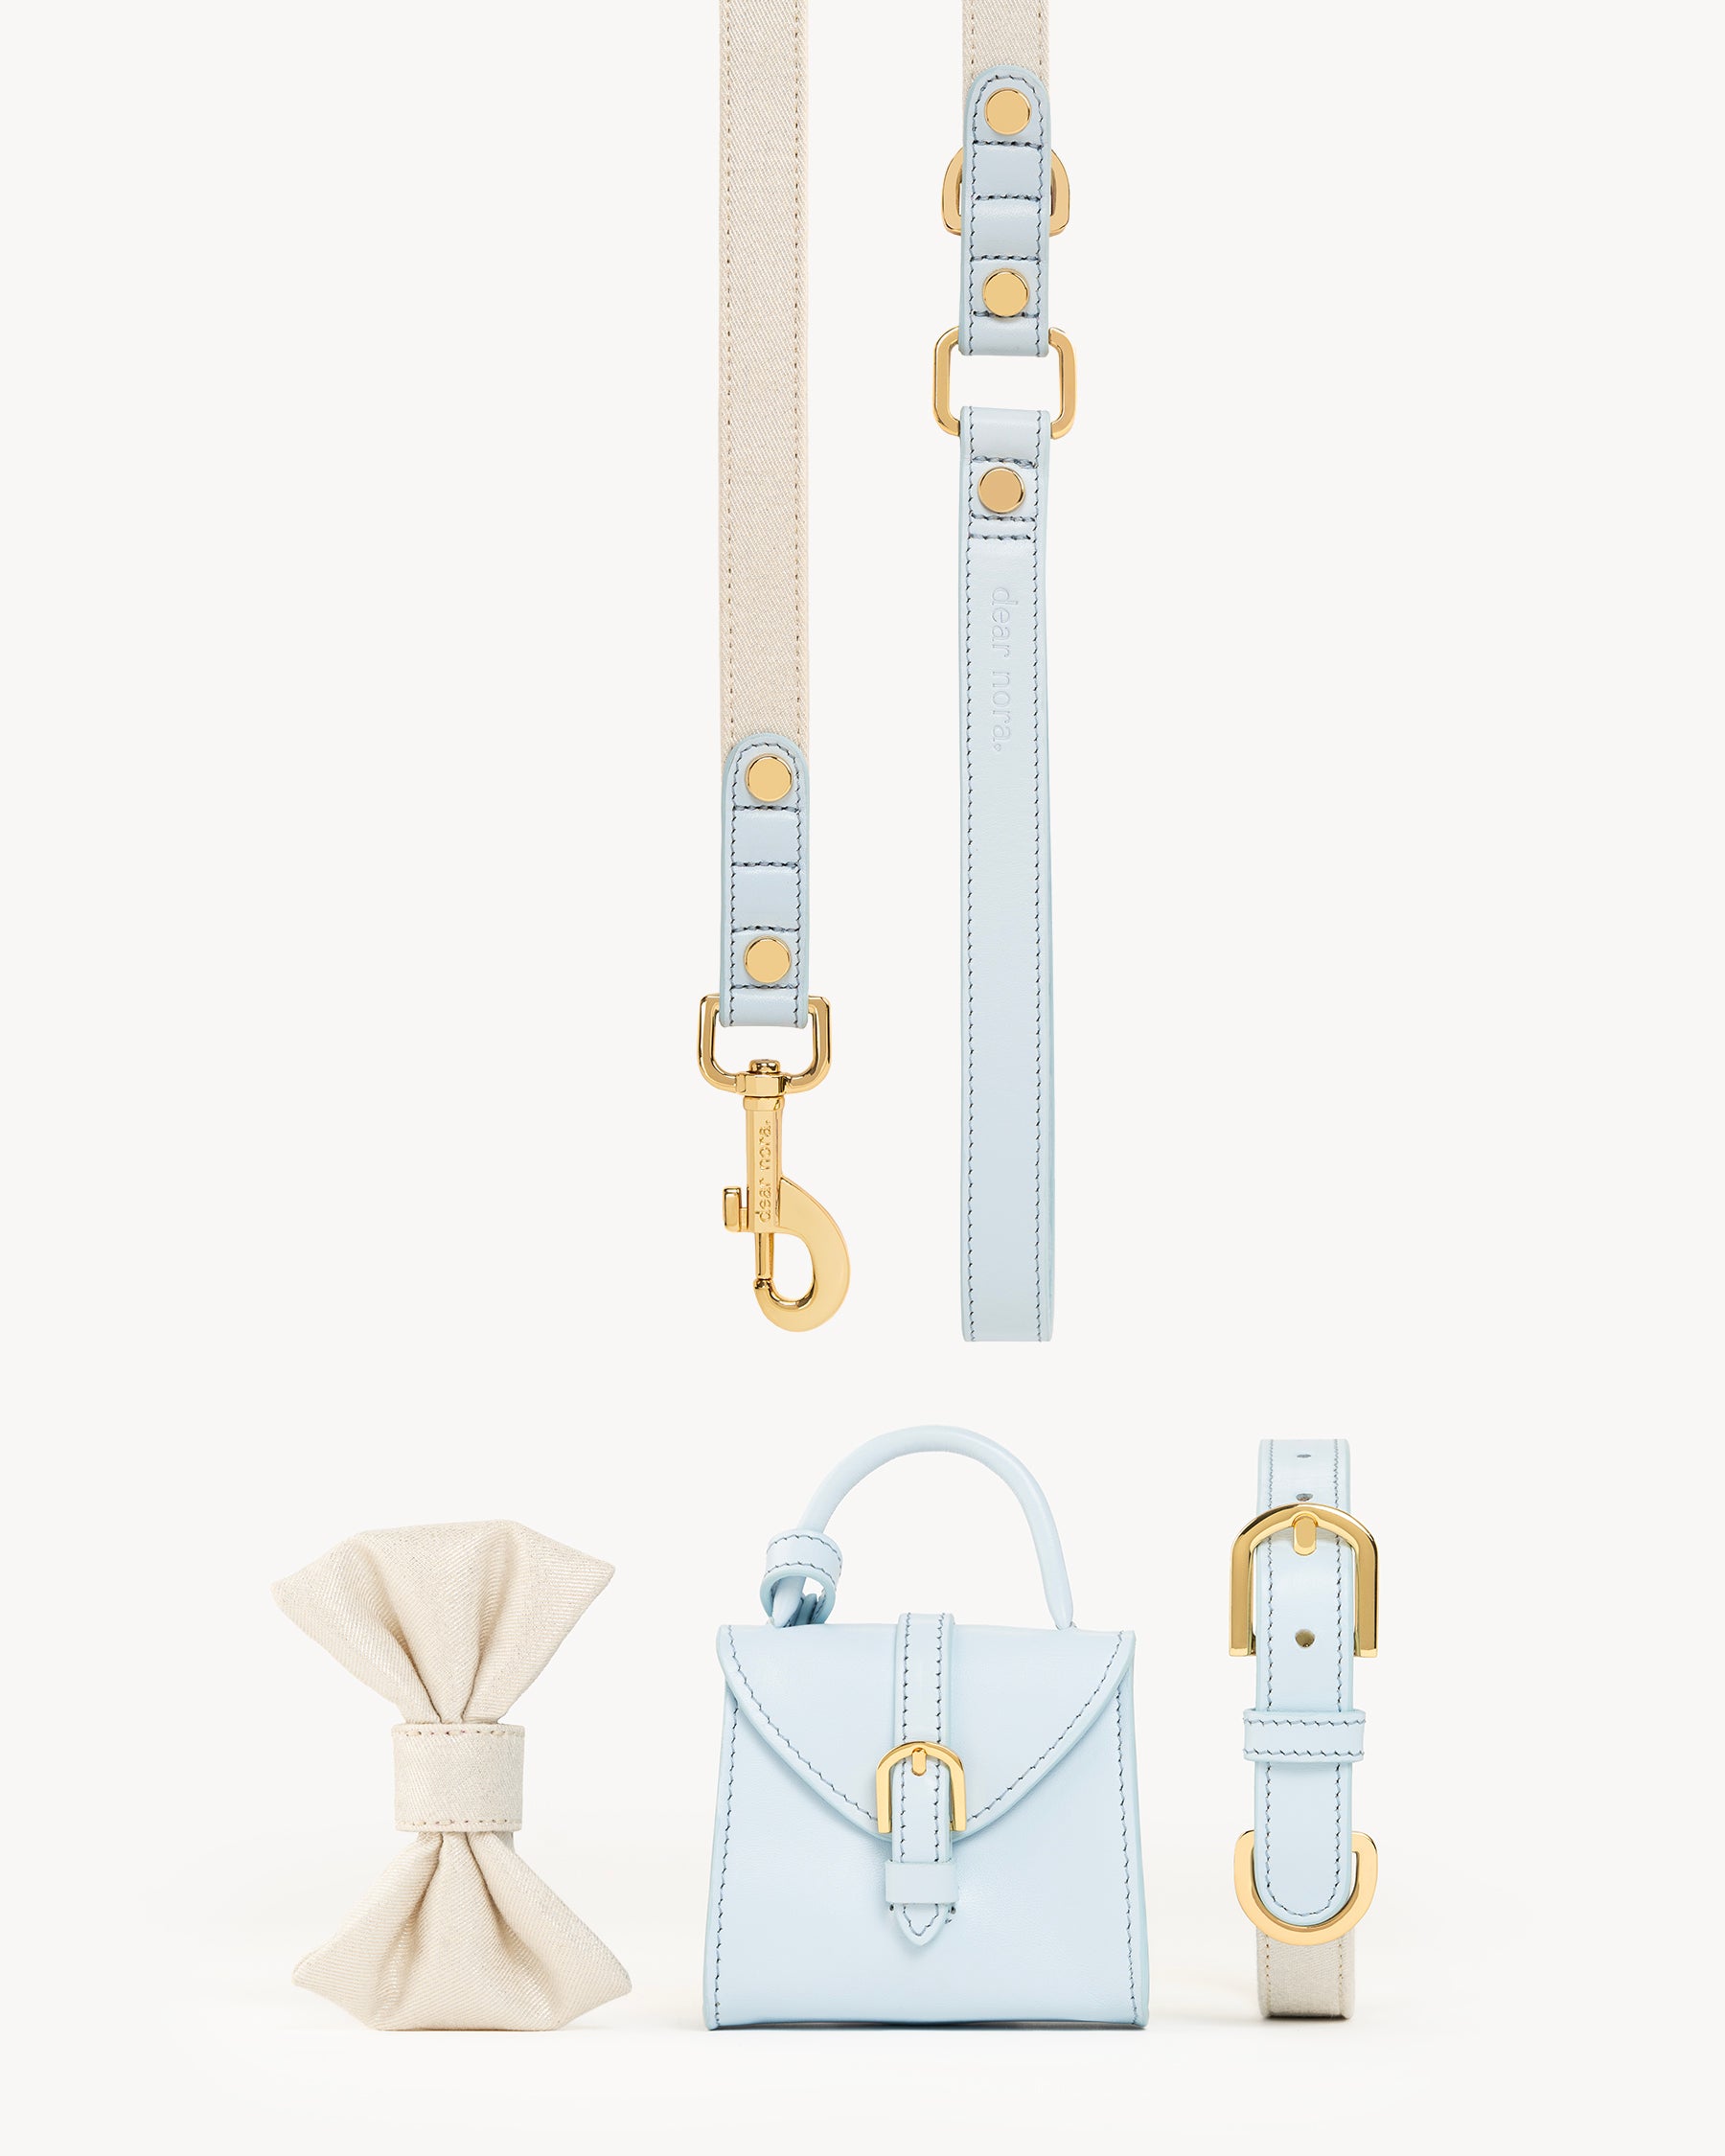 Dear Nora  dog accessories set - baby blue leather and cream sparkle fabric – collar, leash, poop bag holder and bow